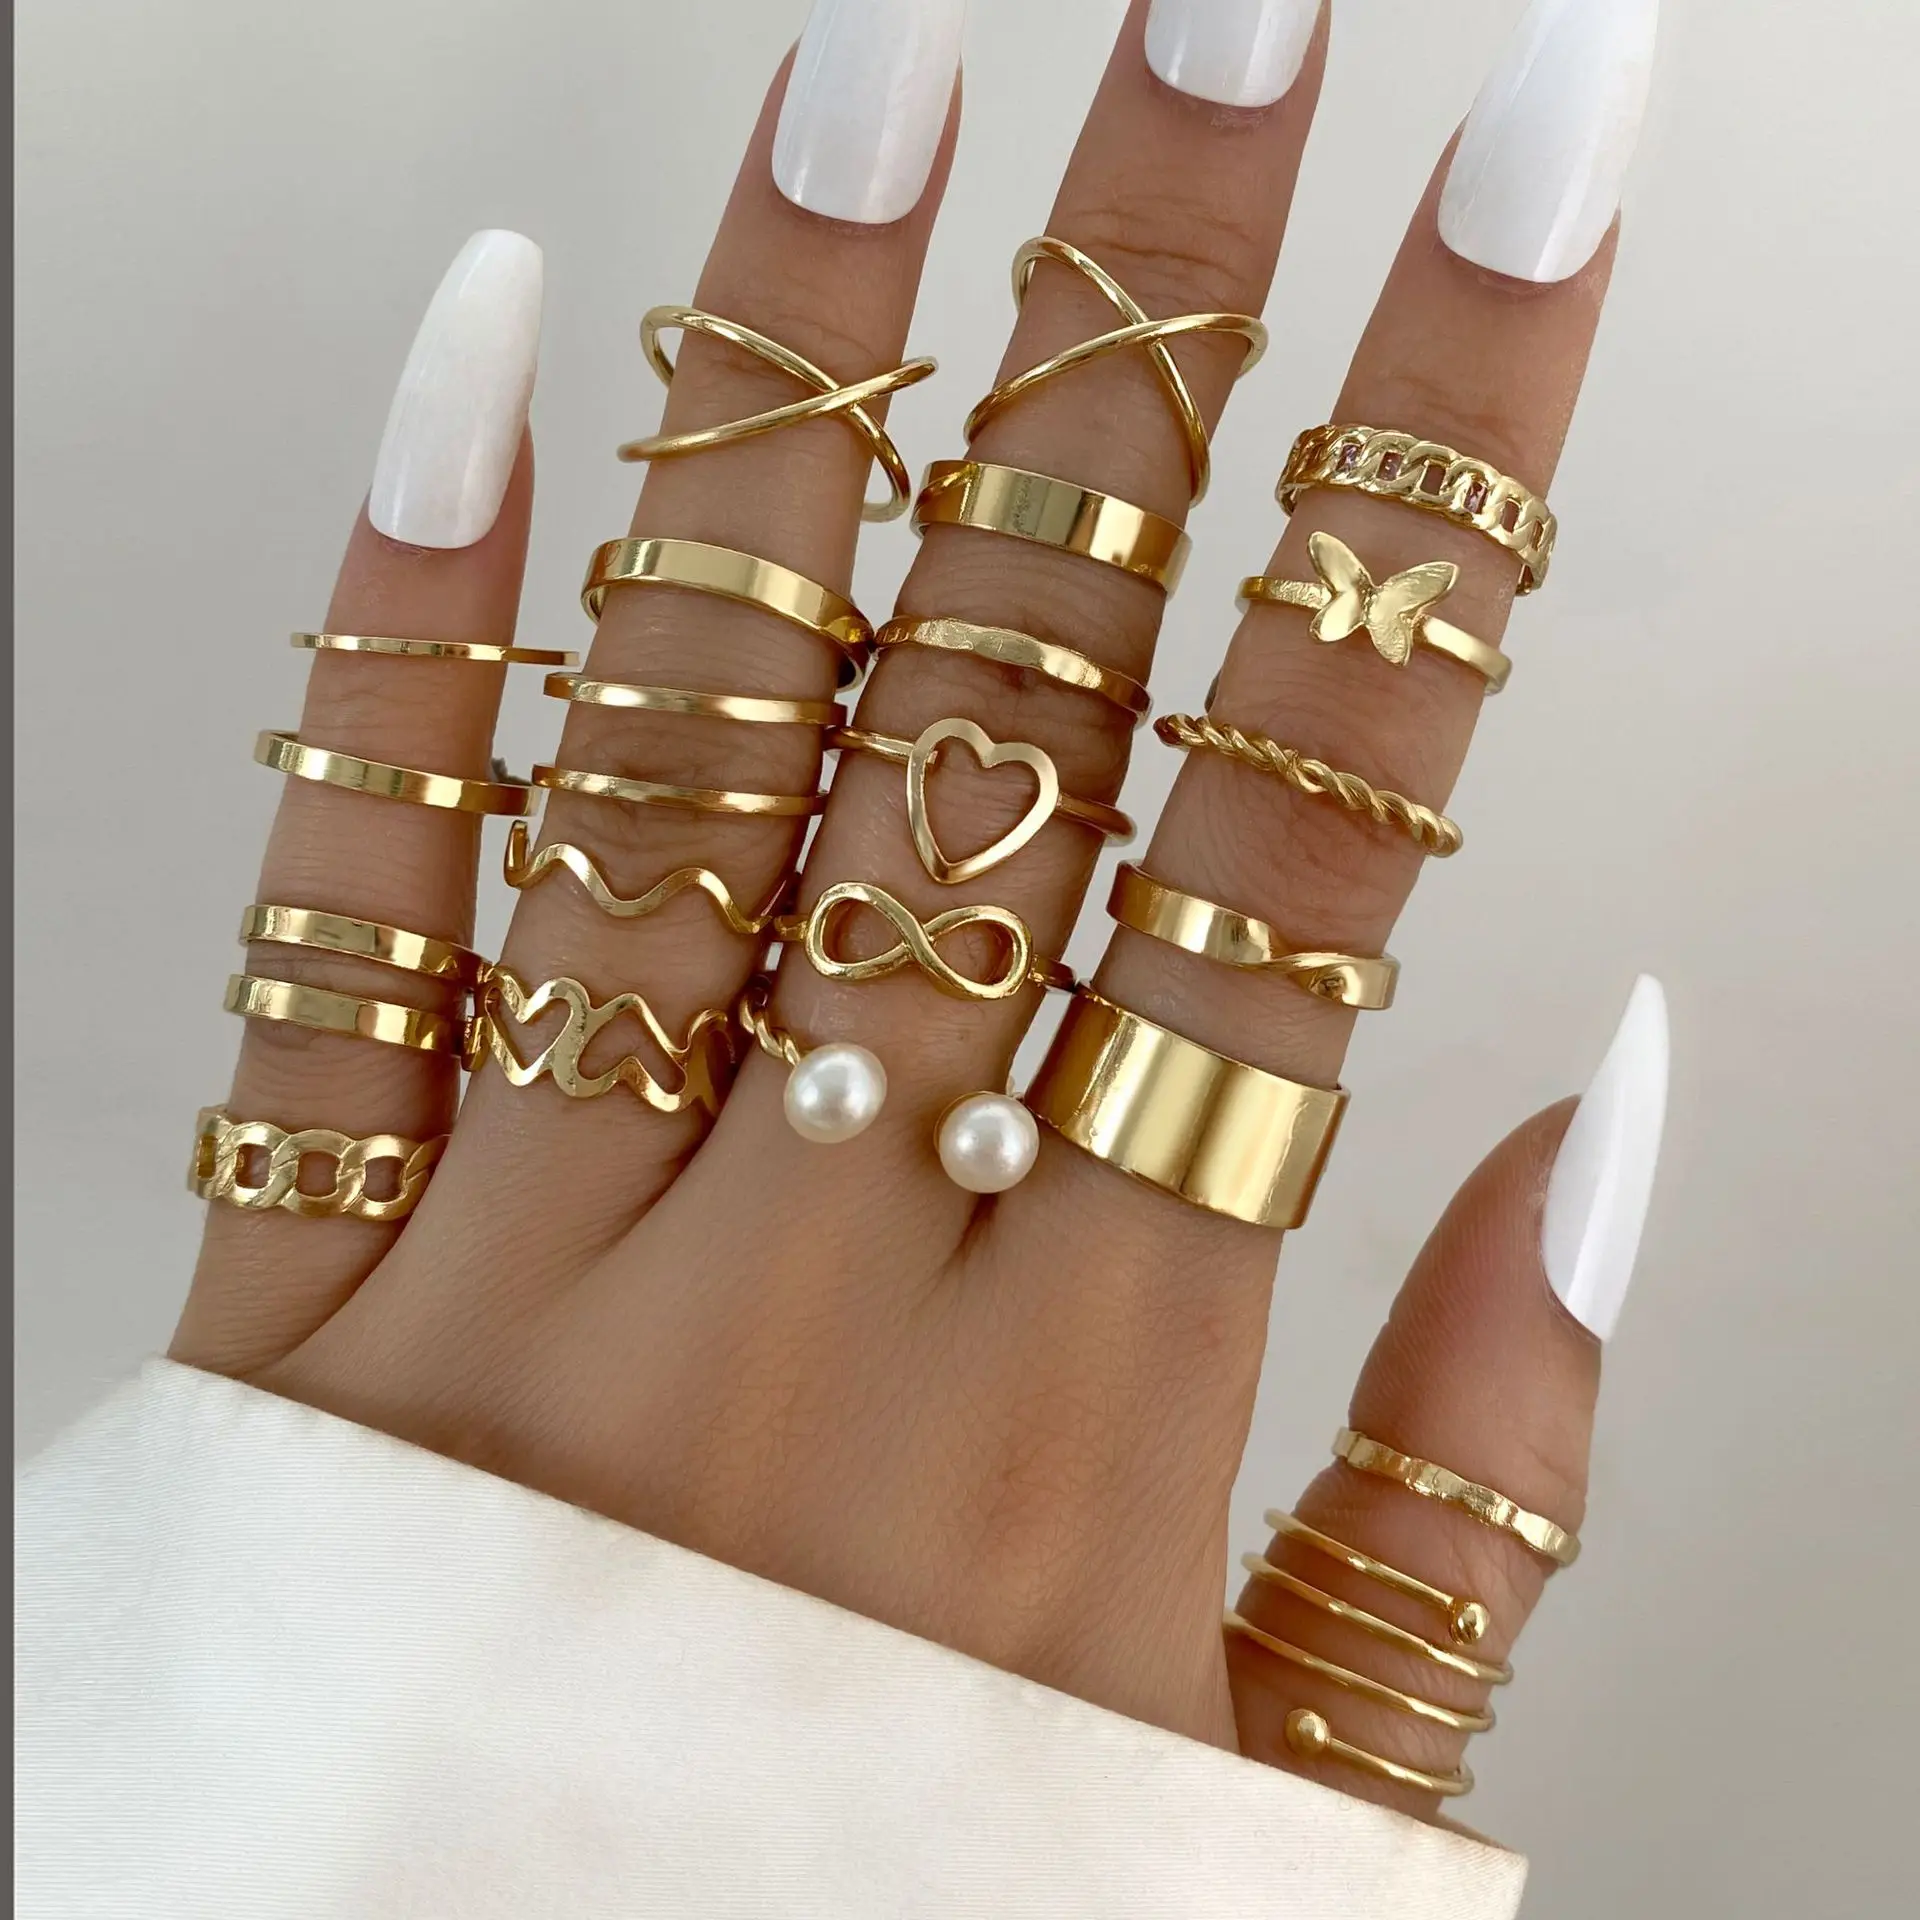 

Gold Vintage Knuckle Rings Set for Women Boho Dainty Stackable Midi Finger Rings Fashion Ring Pack Jewelry Gifts for Girls